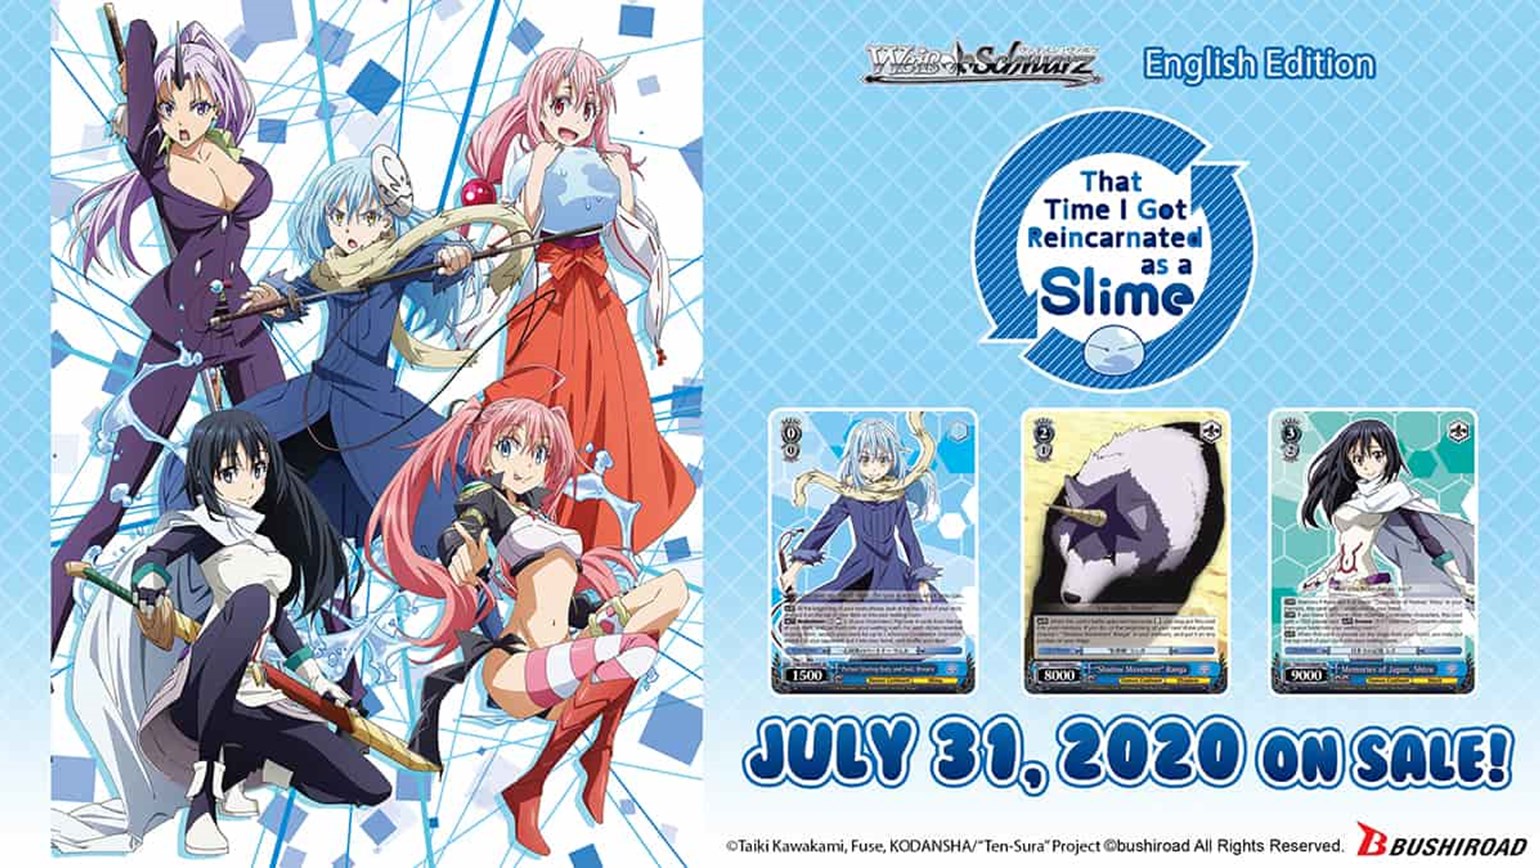 Weiss Schwarz: That Time I Got Reincarnated as a Slime Coming July 31st